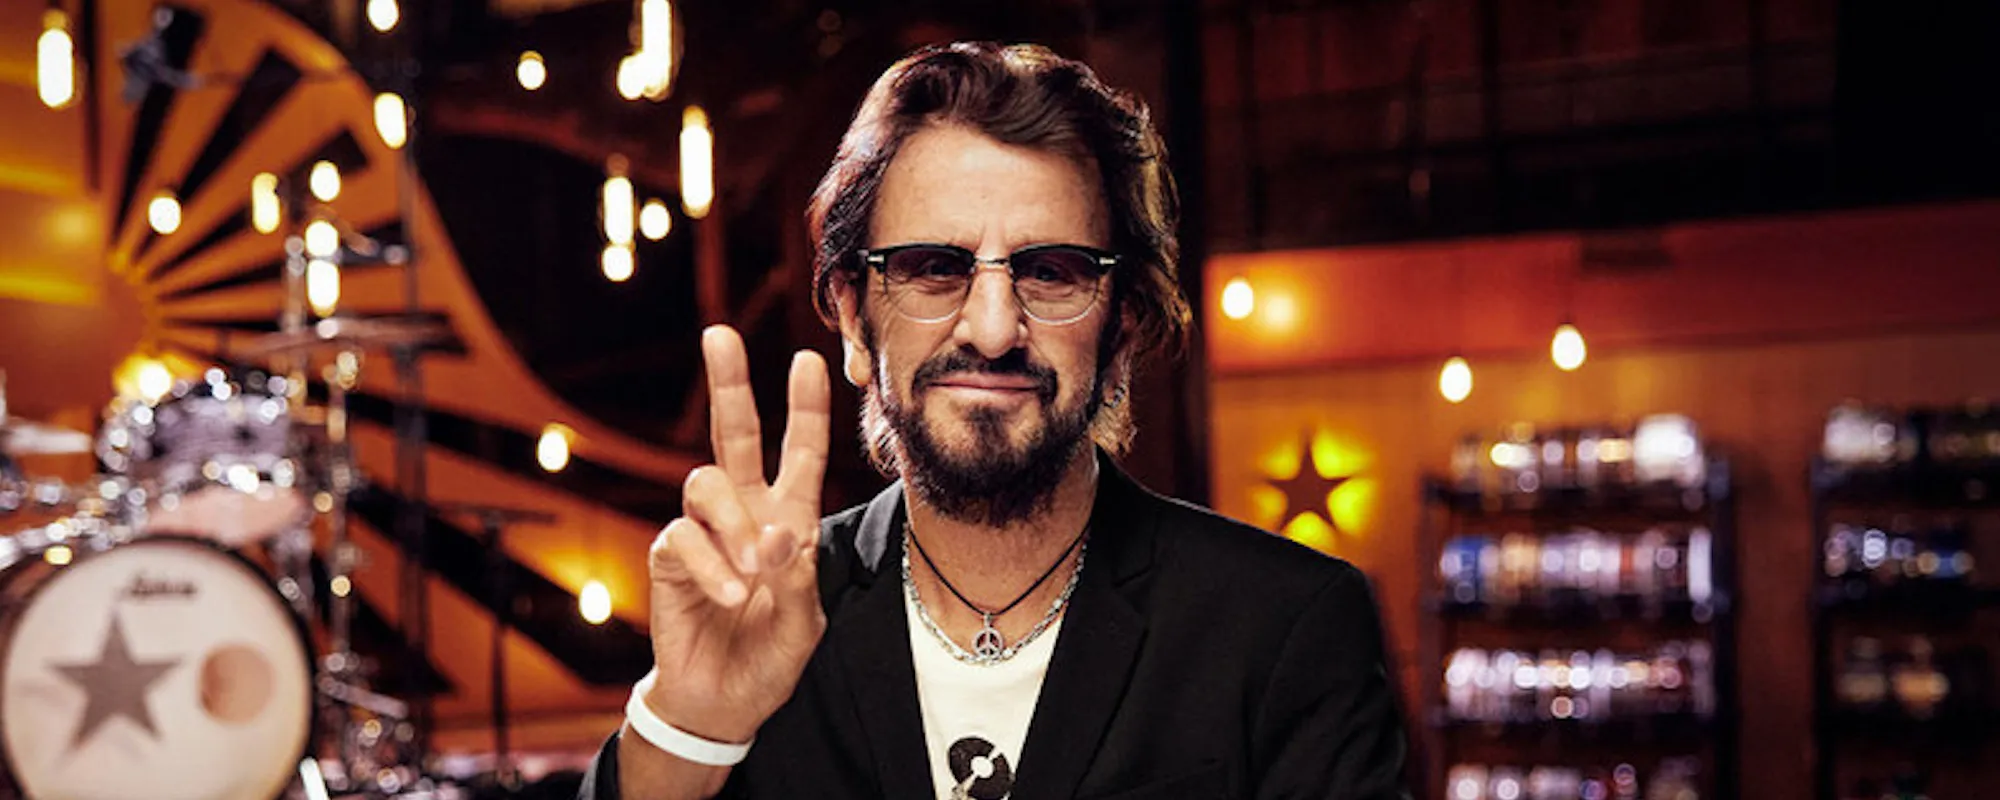 Ringo Starr Releases ‘EP3’ Video for “World Go Round”